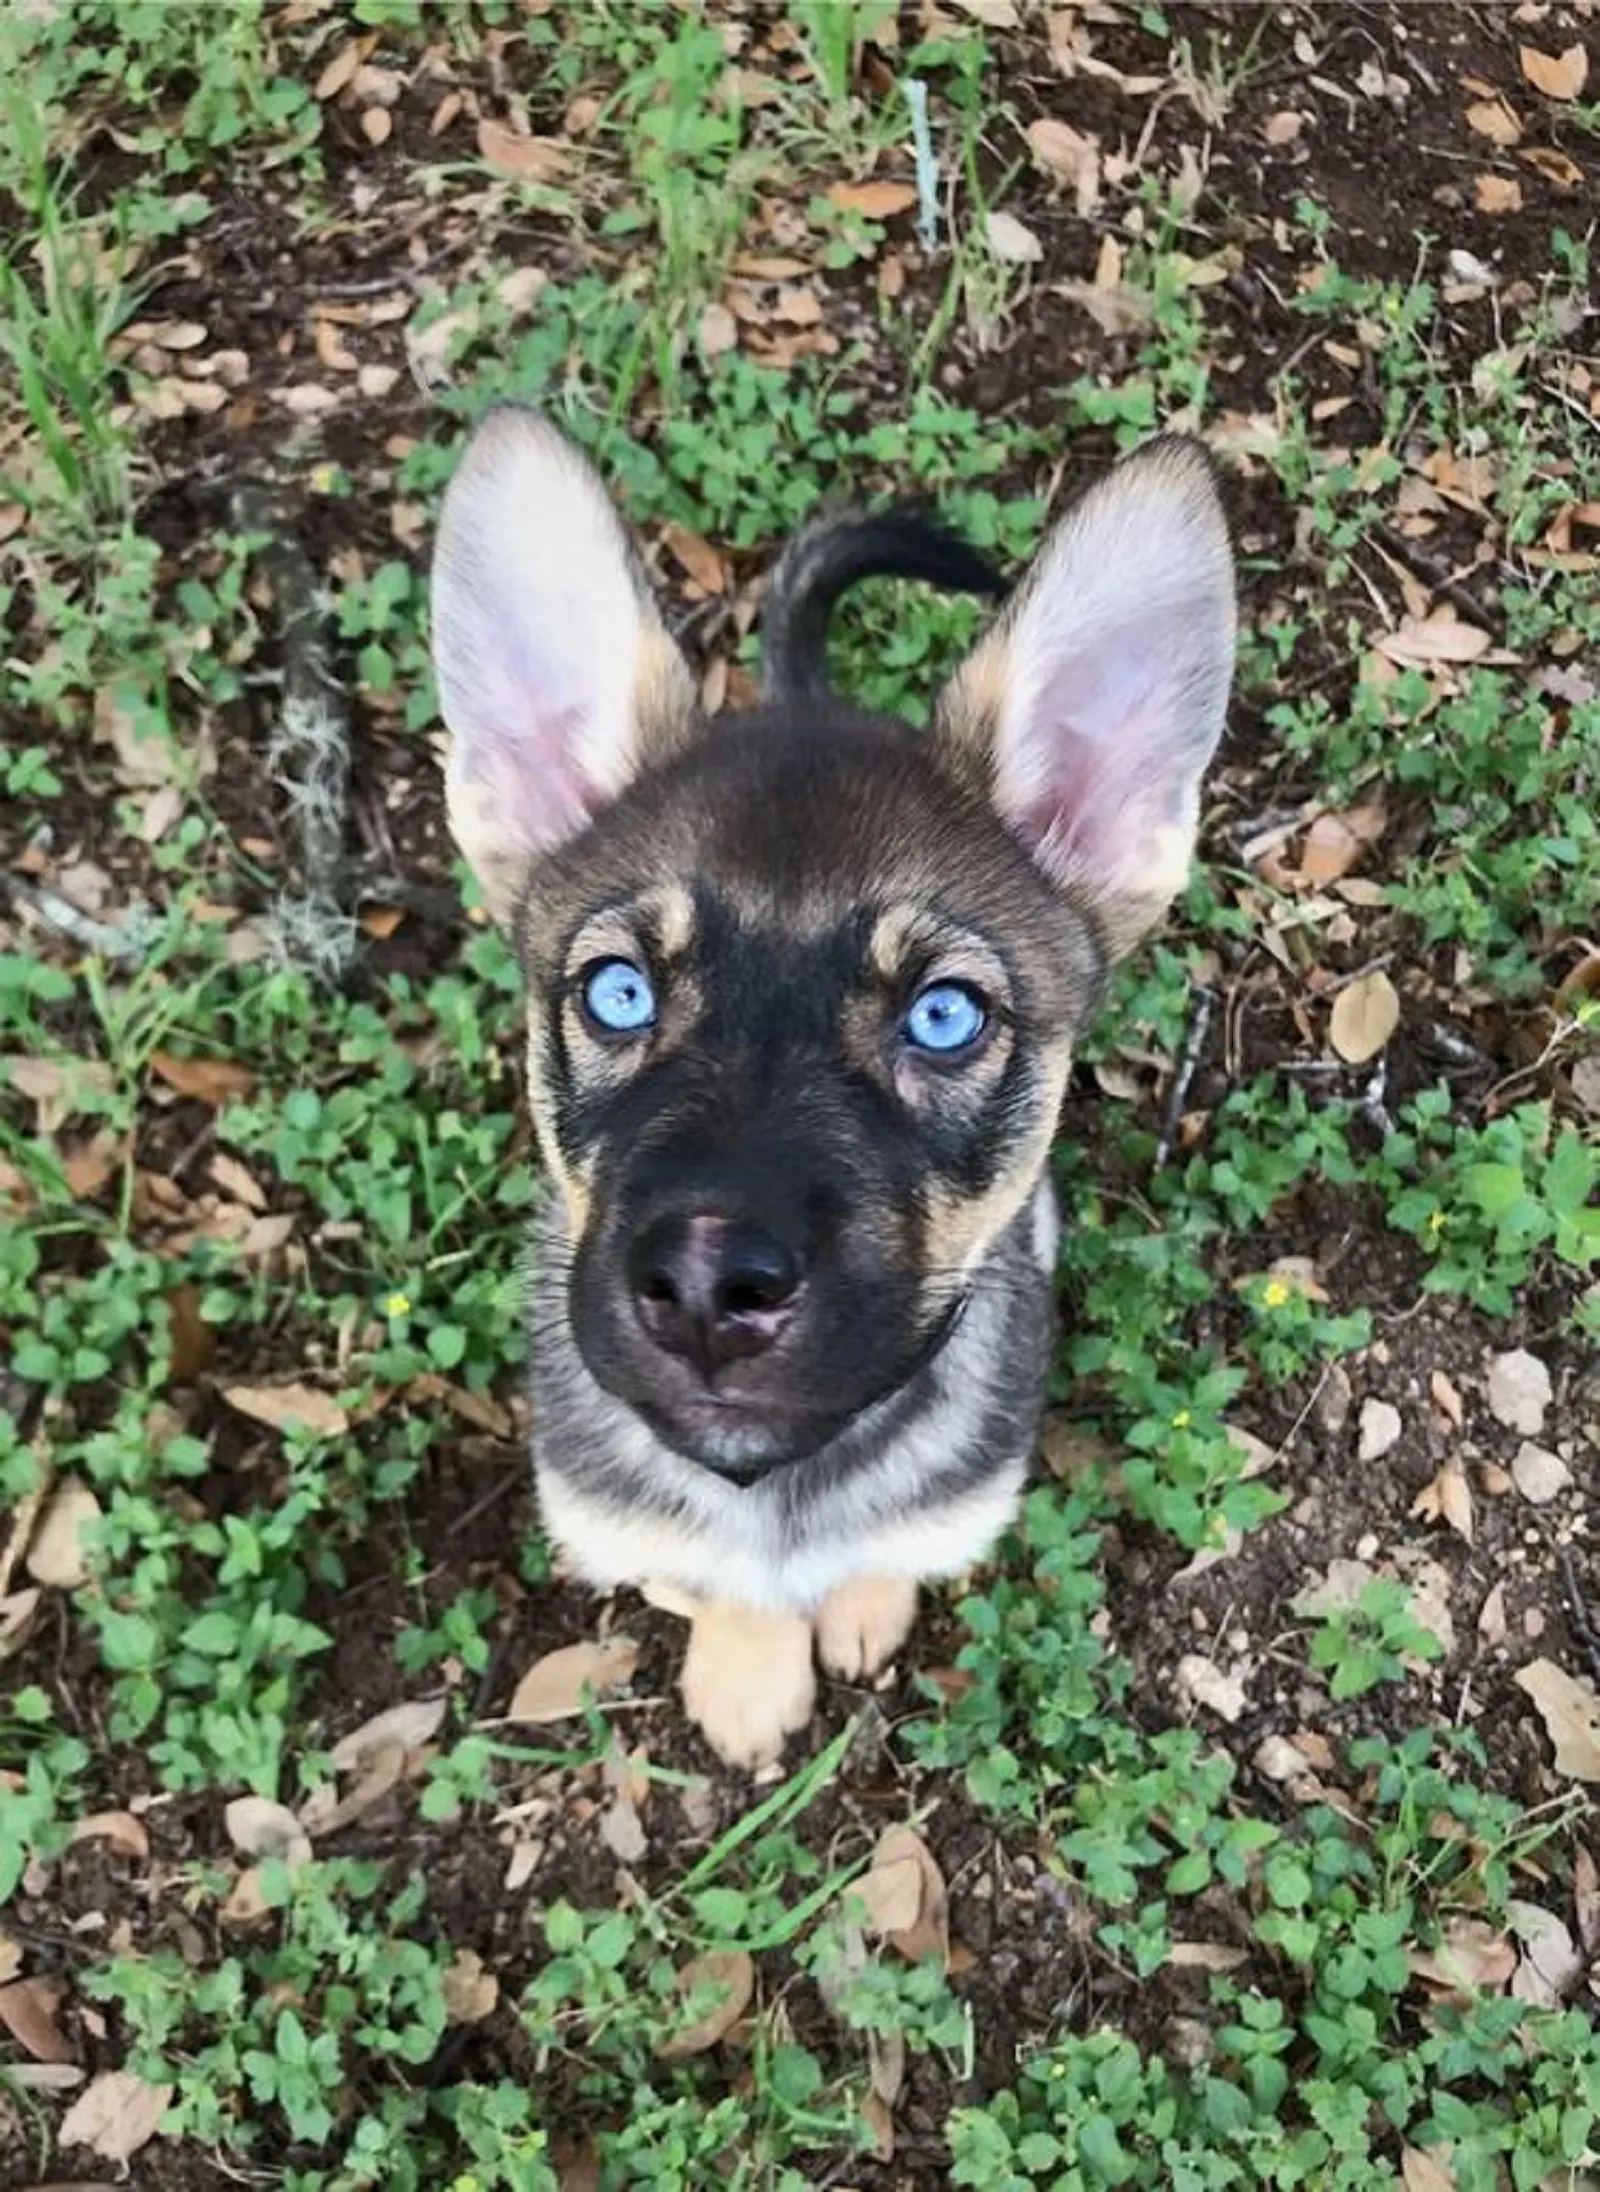 blu eyed german shepherd puppy sitting on the ground and looking into camera